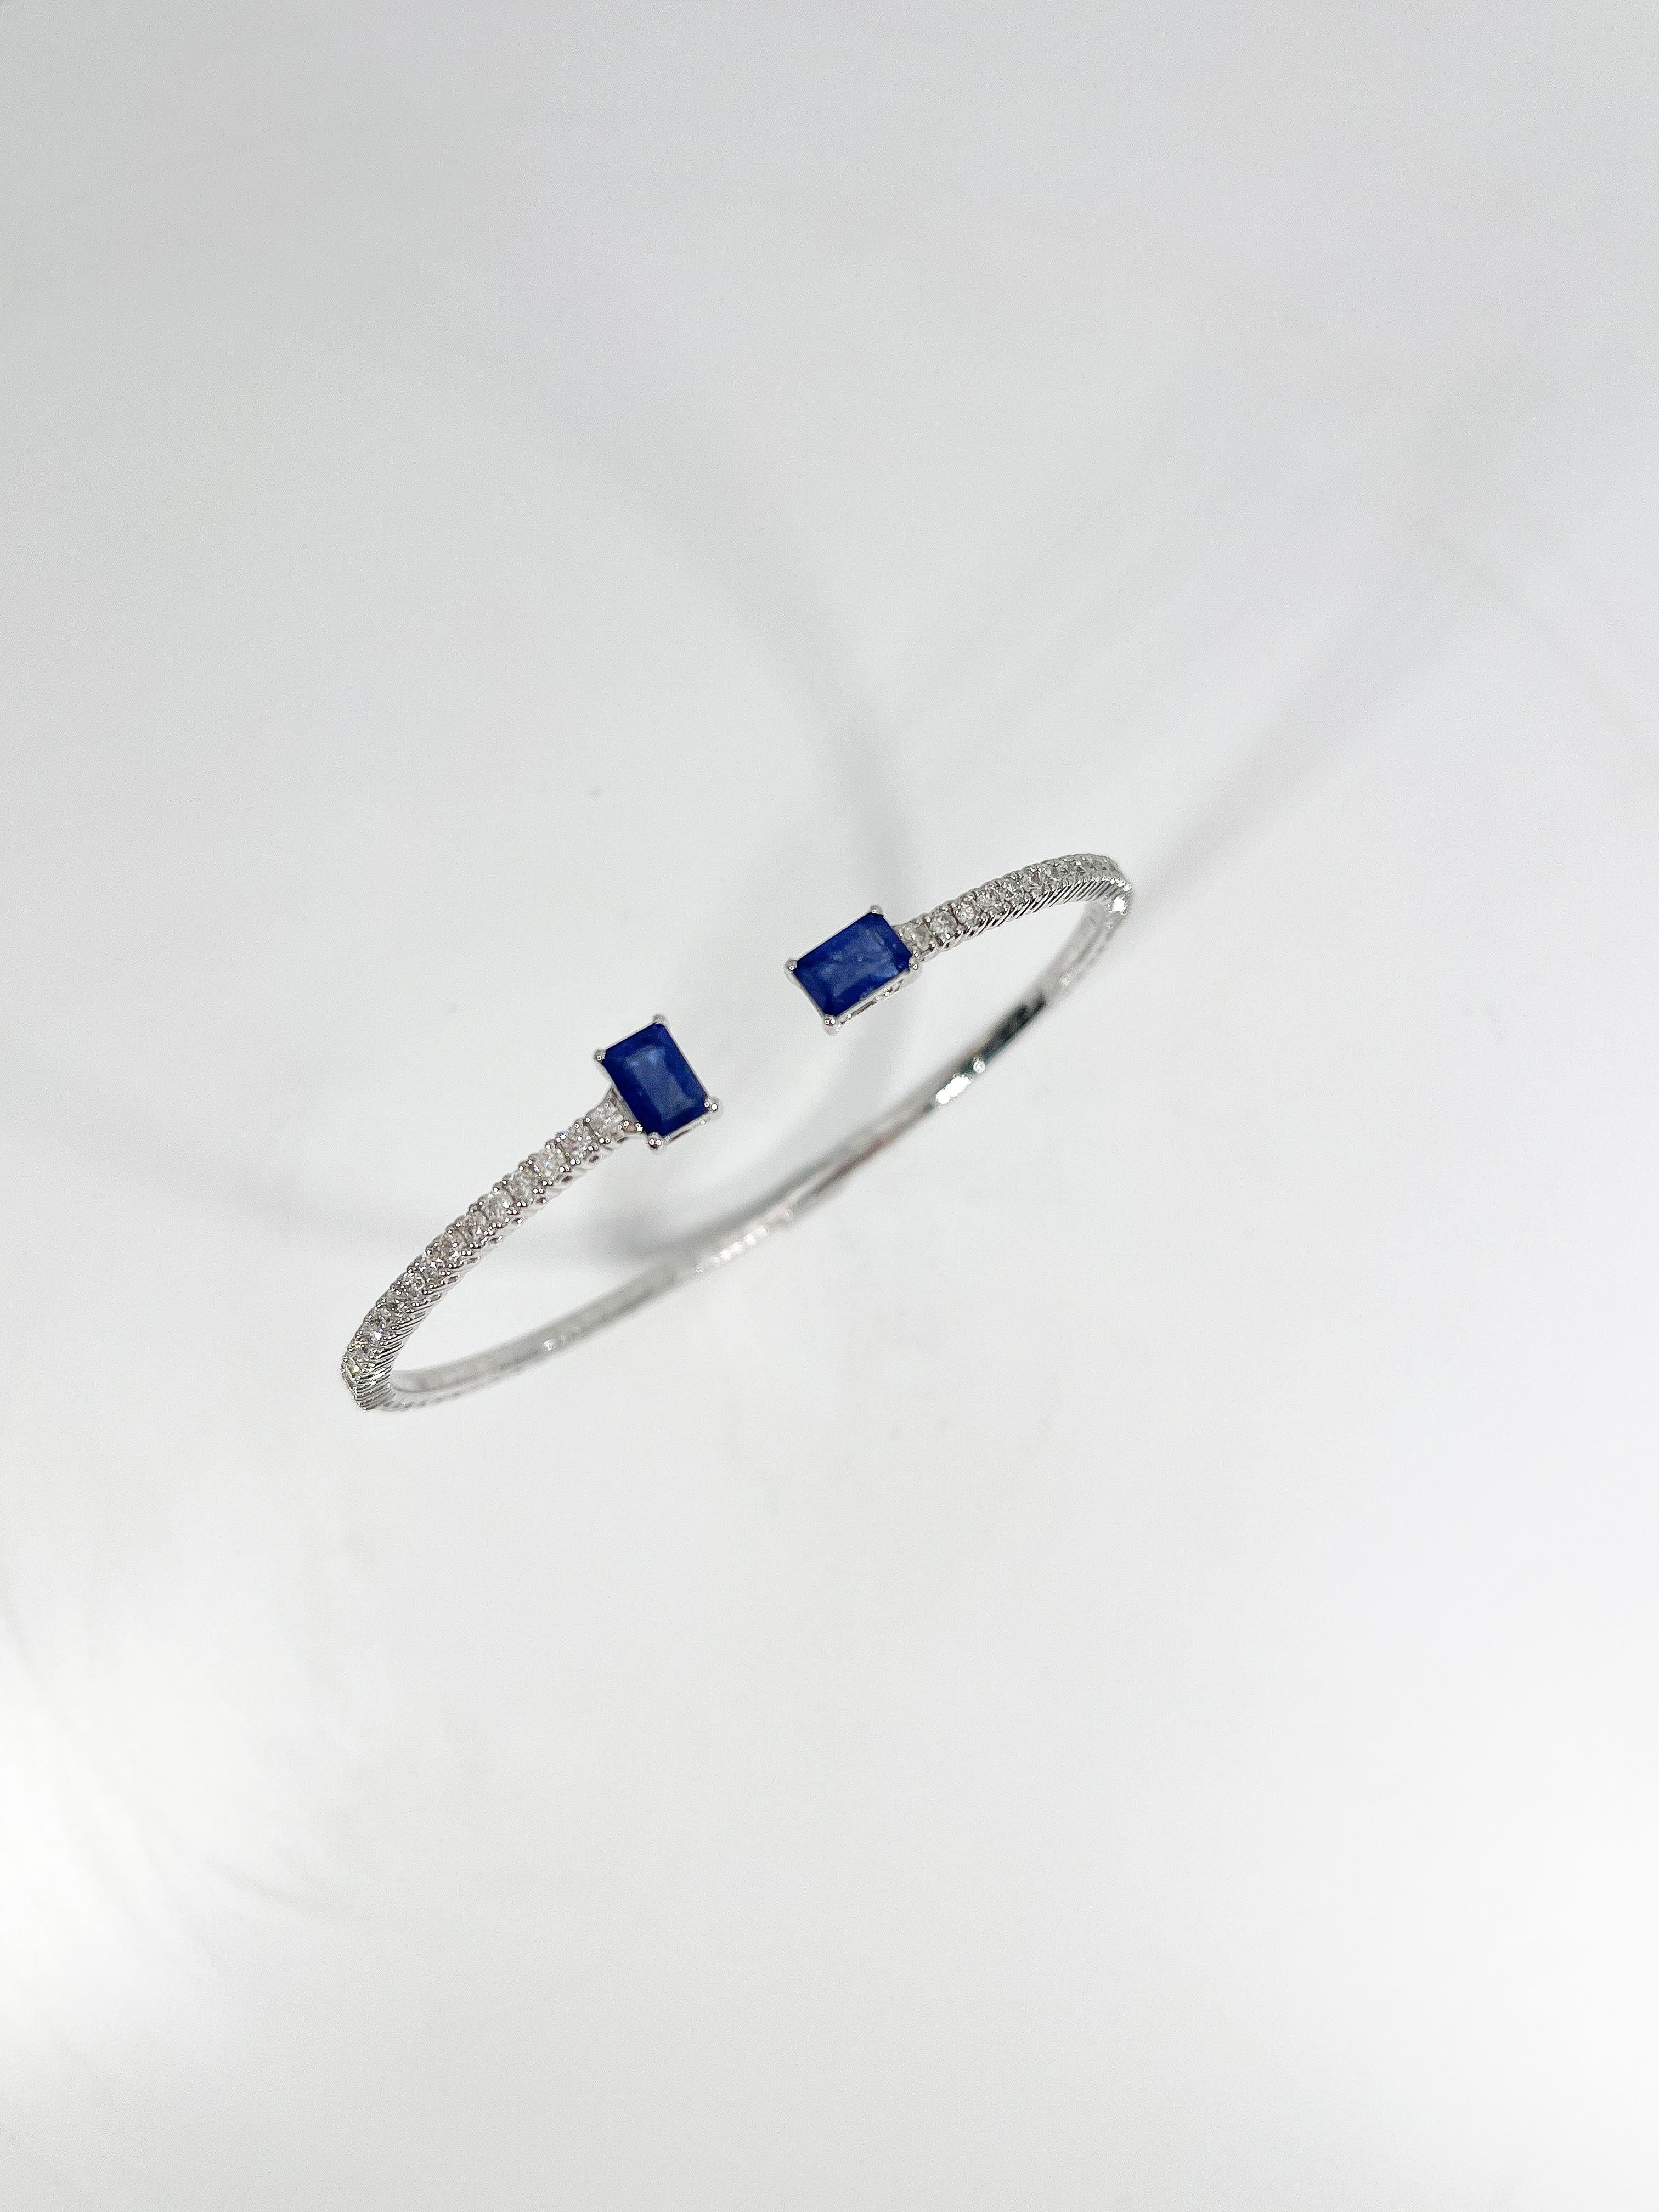 14k white gold diamond and sapphire flex bangle. The diamonds in this bracelet are all round, the two sapphires are both radiant cut, the bangle will stretch to fit almost any wrist, the width is 6 mm, and the total weight is 8.75 grams.